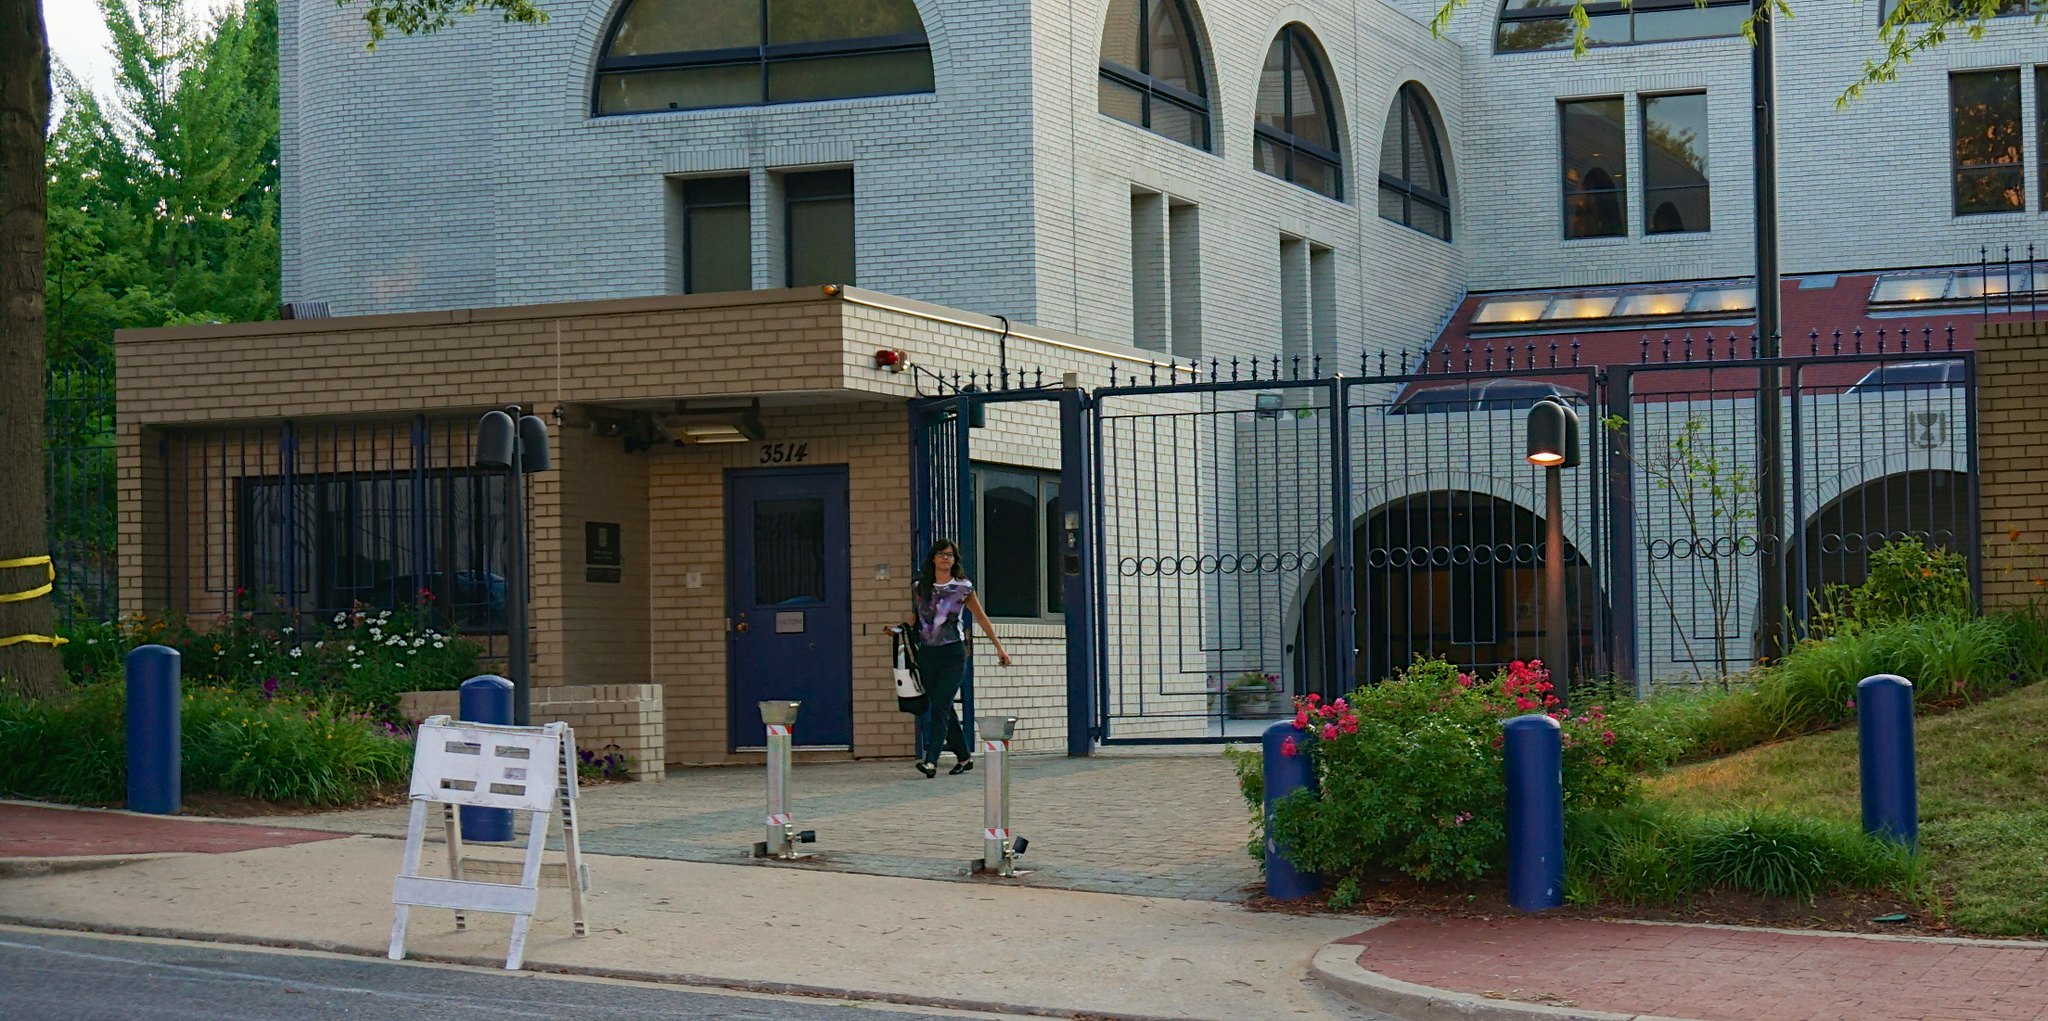 Israeli embassy in Washington, US, where a US Air Force member set himself on fire. 